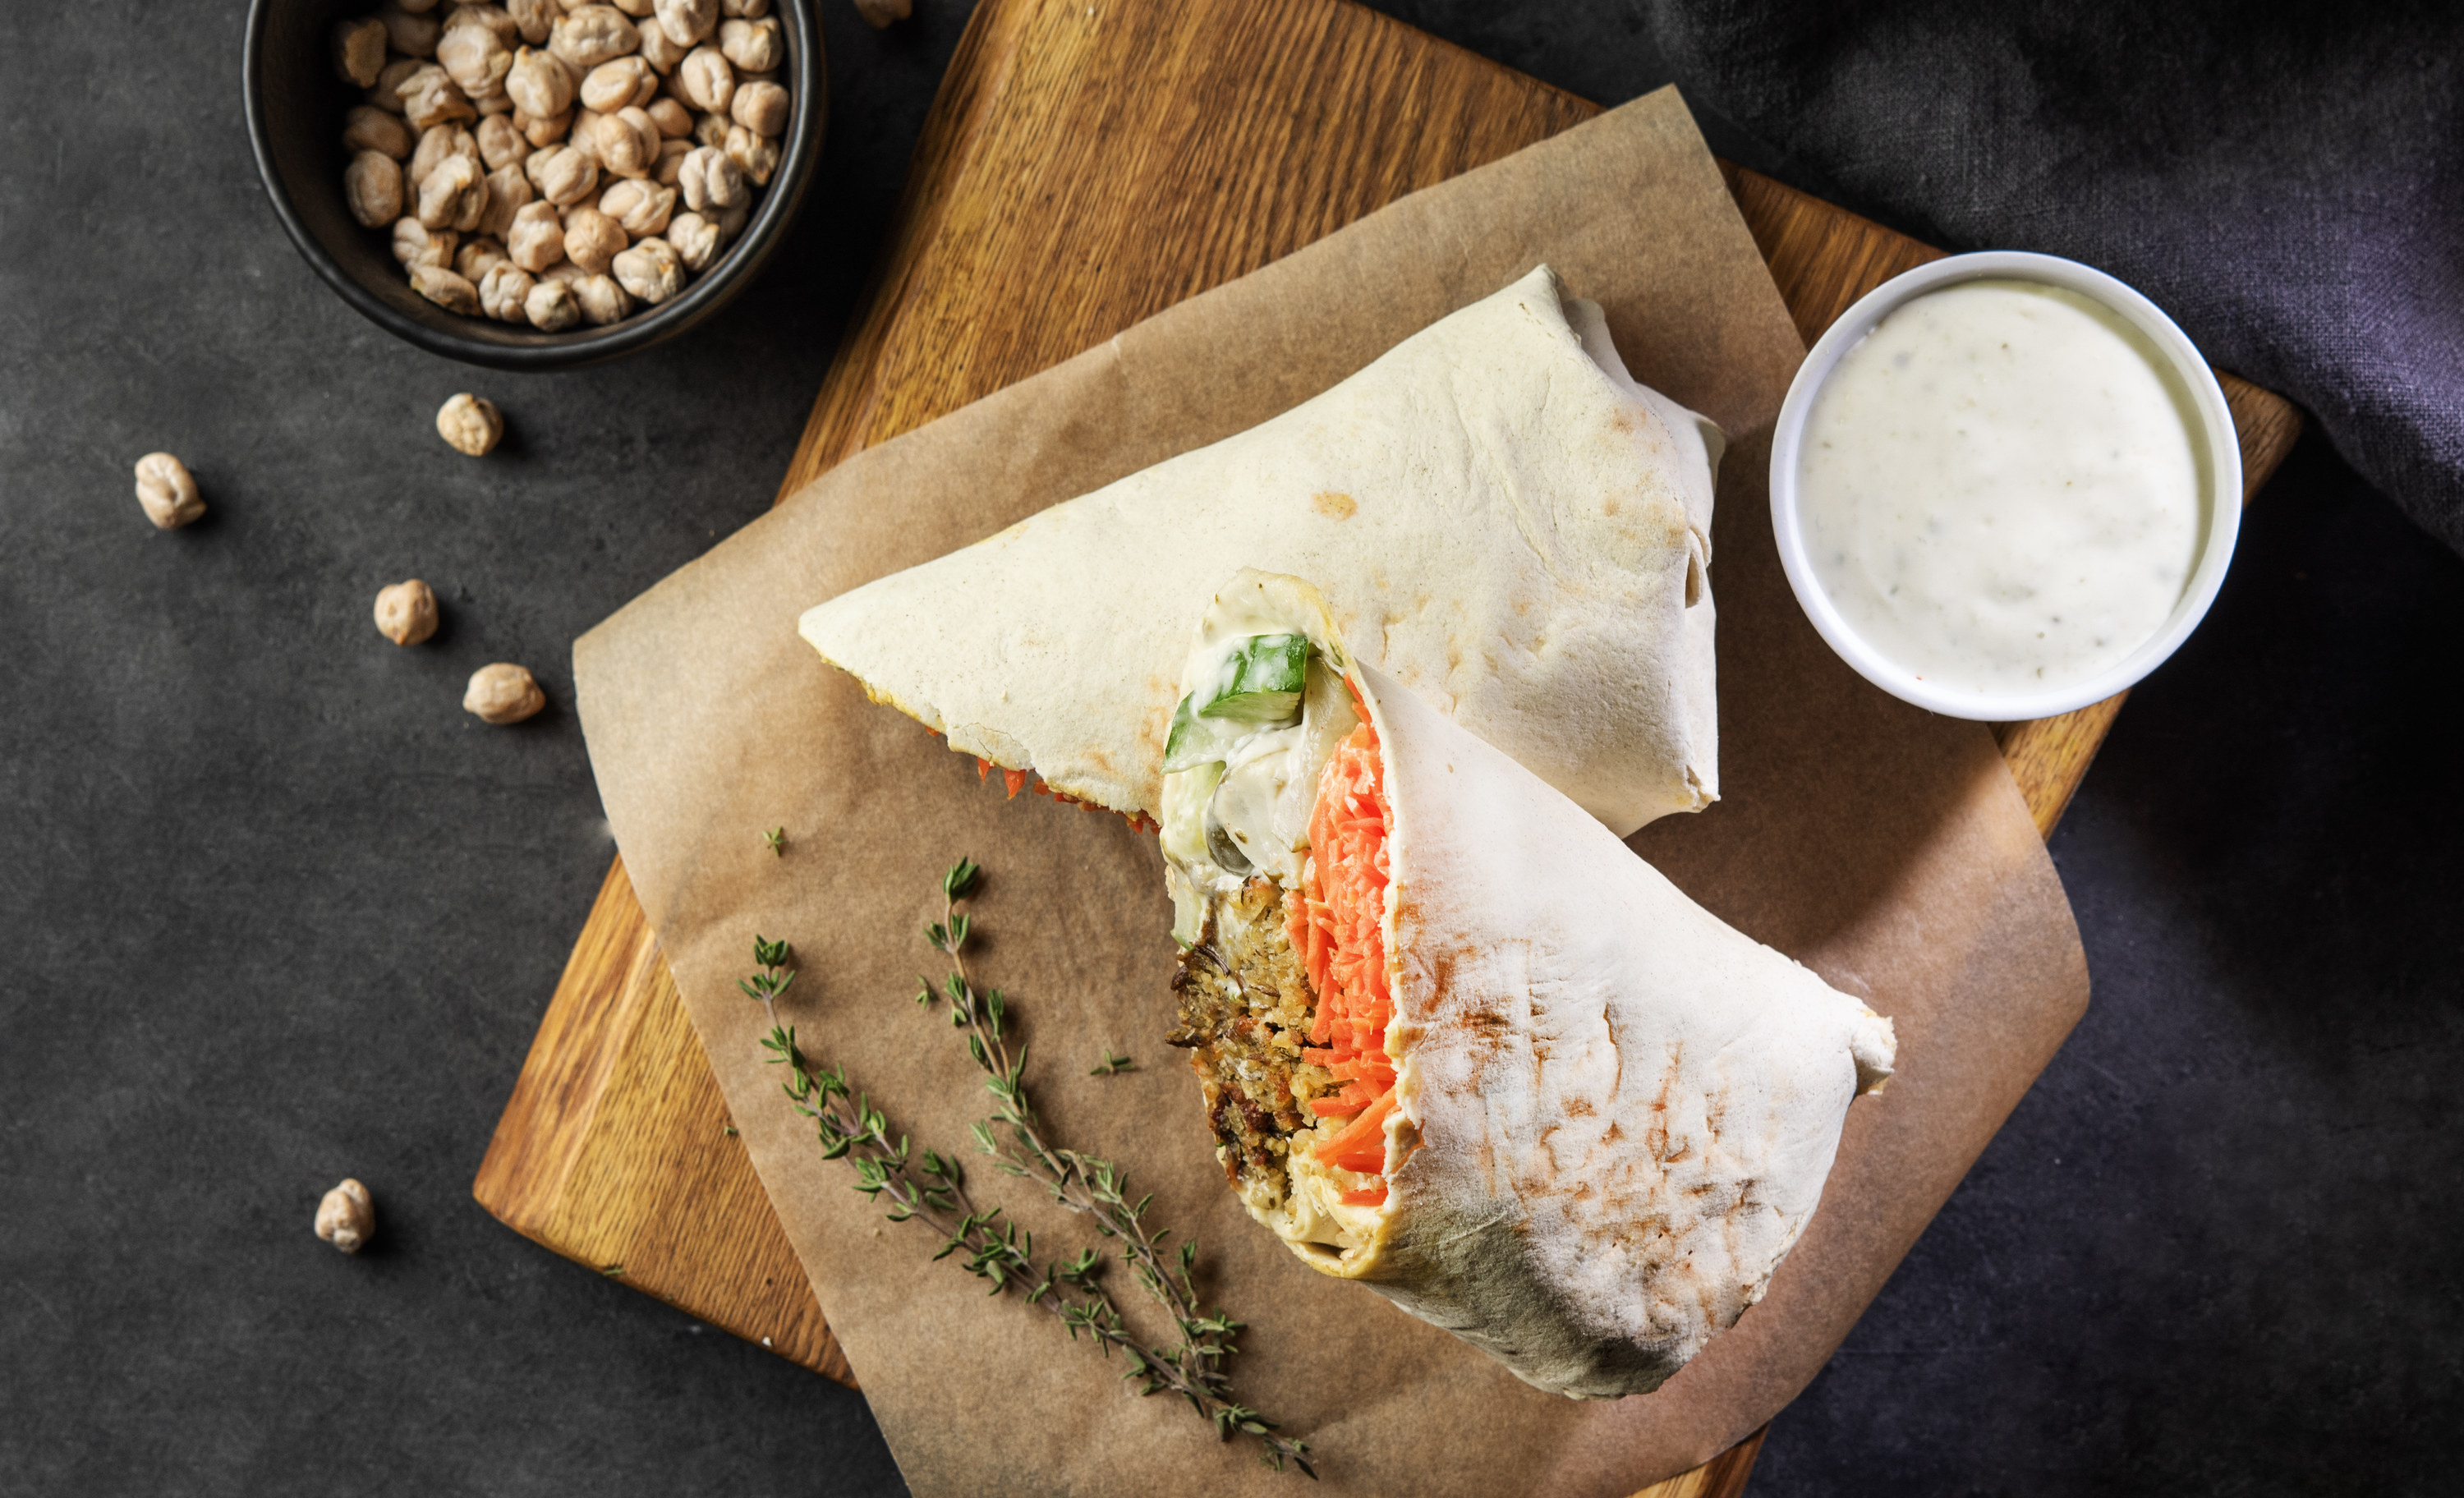 pita wrap filled with chickpeas and vegetables on wood serving board